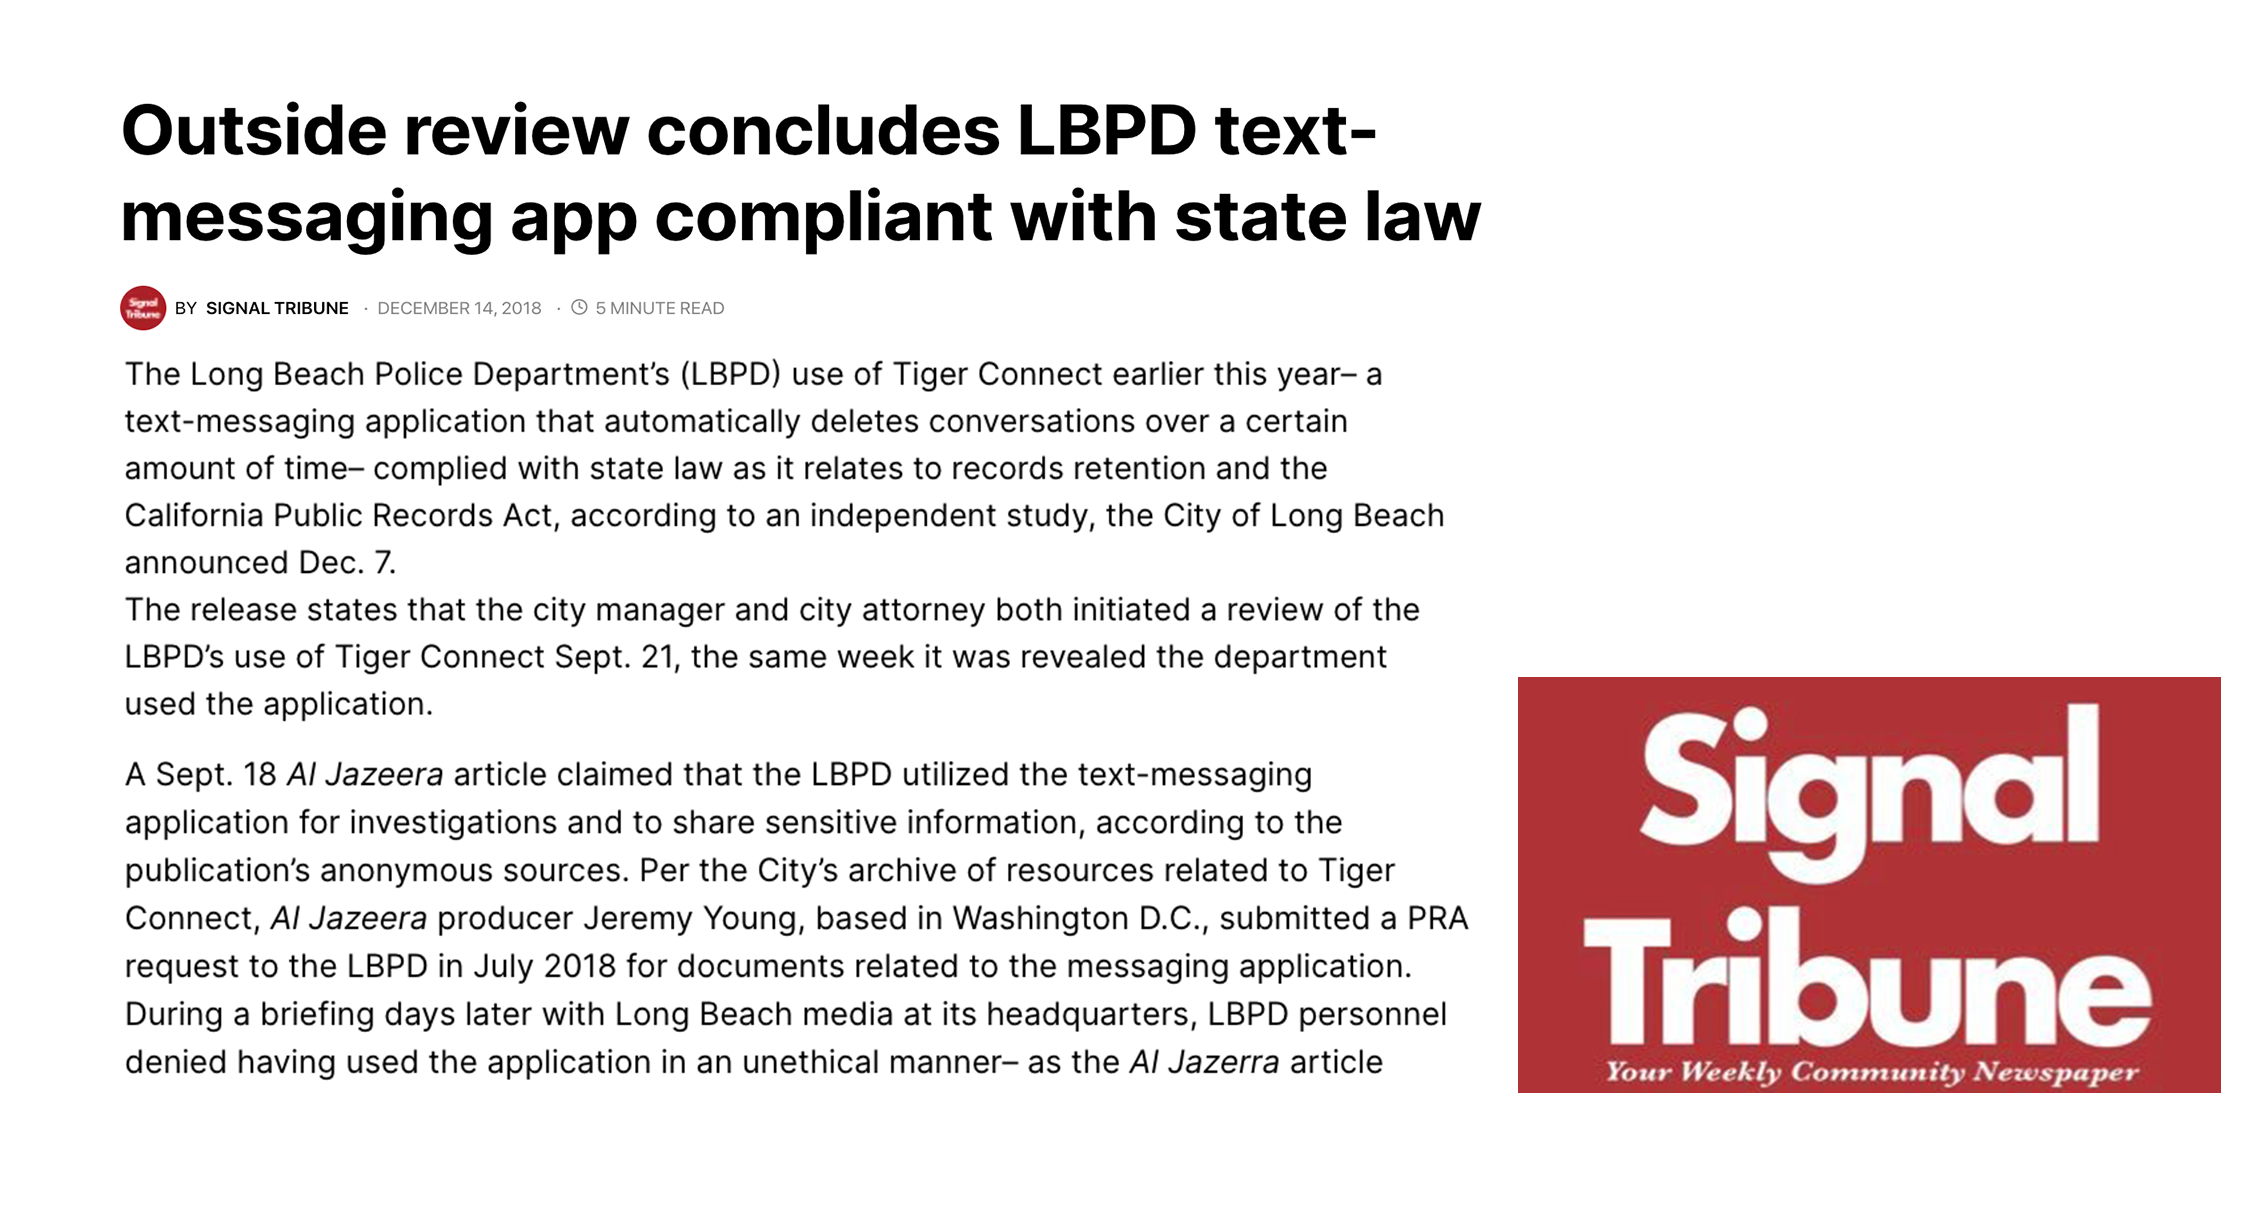 Outside review concludes LBPD text-messaging app compliant with state law